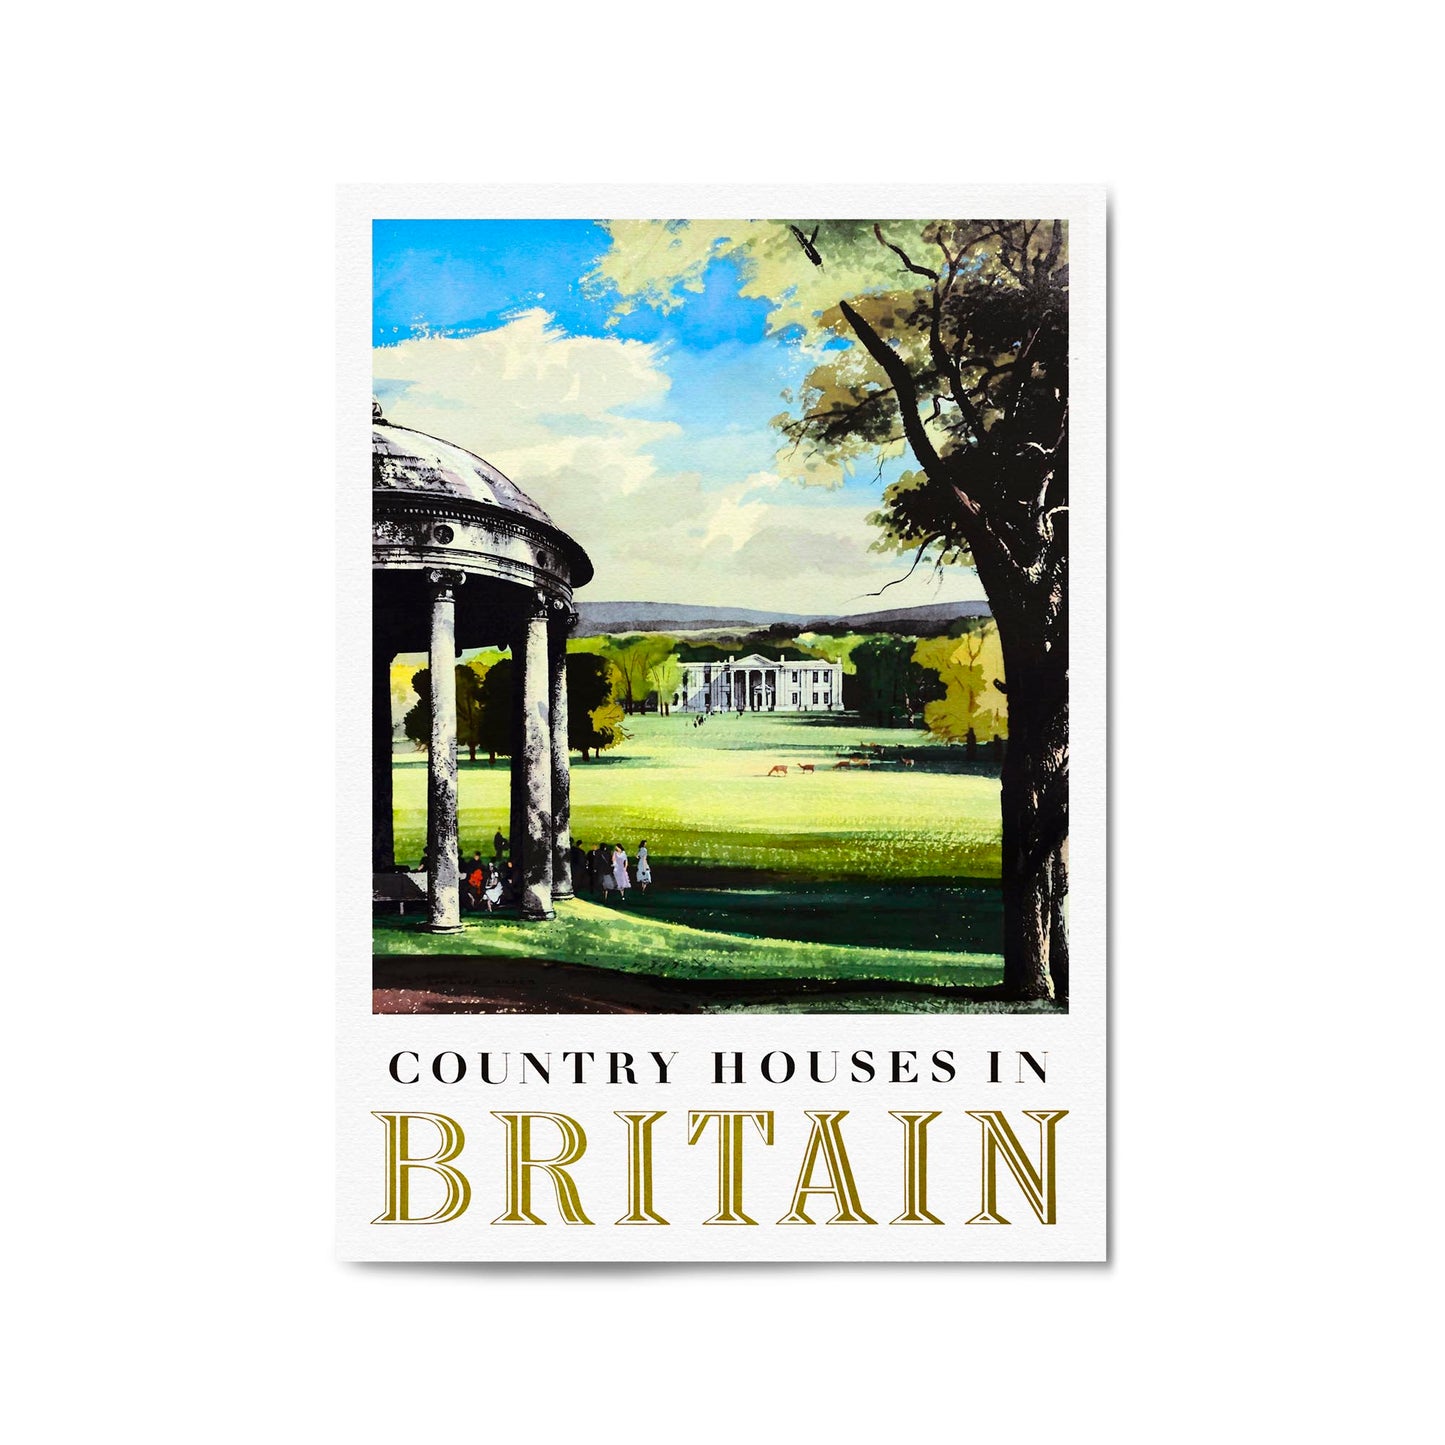 Country Houses In Britain by Rowland Hilder | Framed Vintage Travel Poster